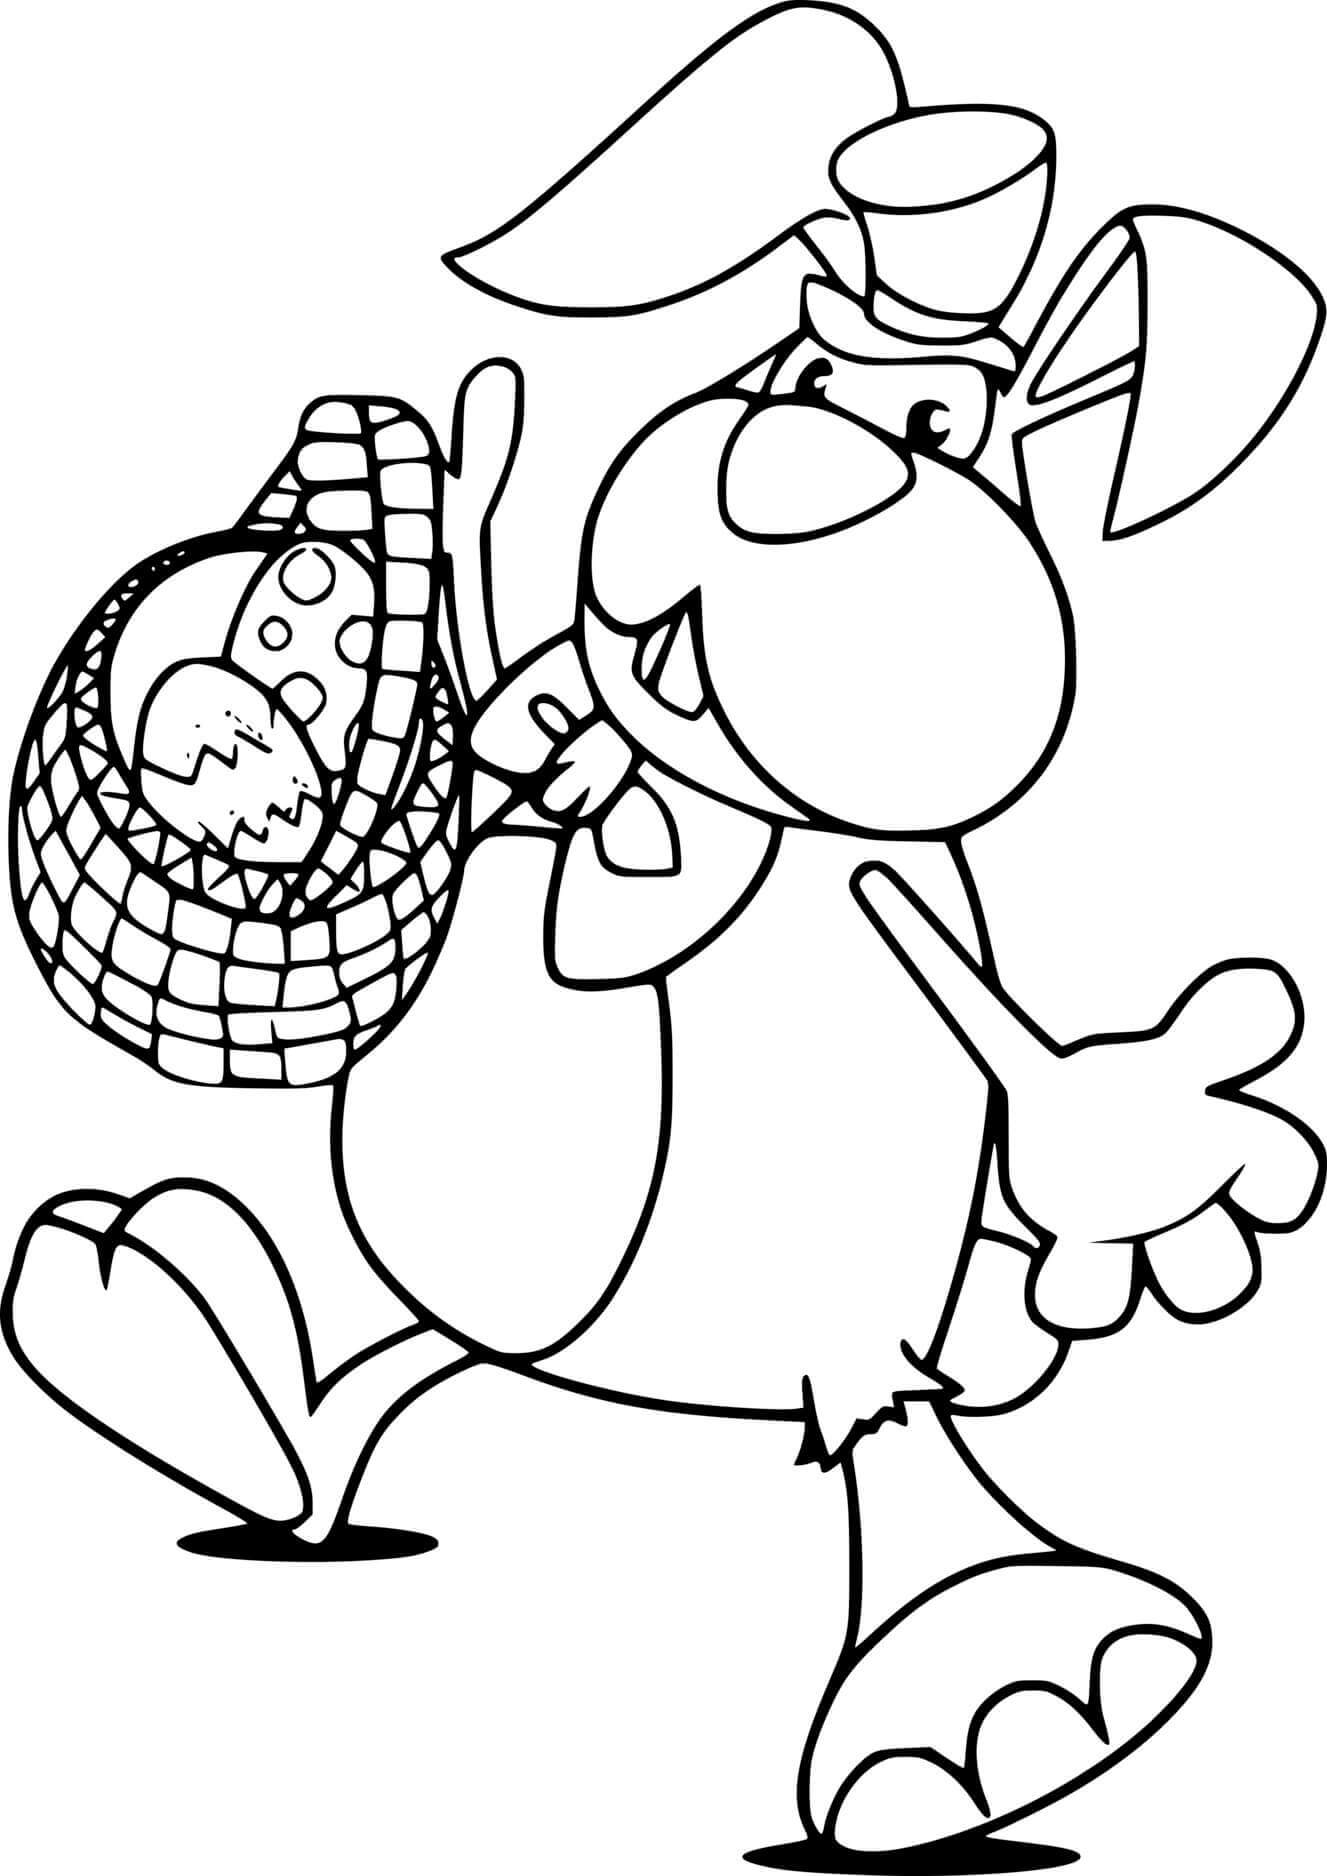 A Big Bunny Holds An Easter Basket Coloring Page